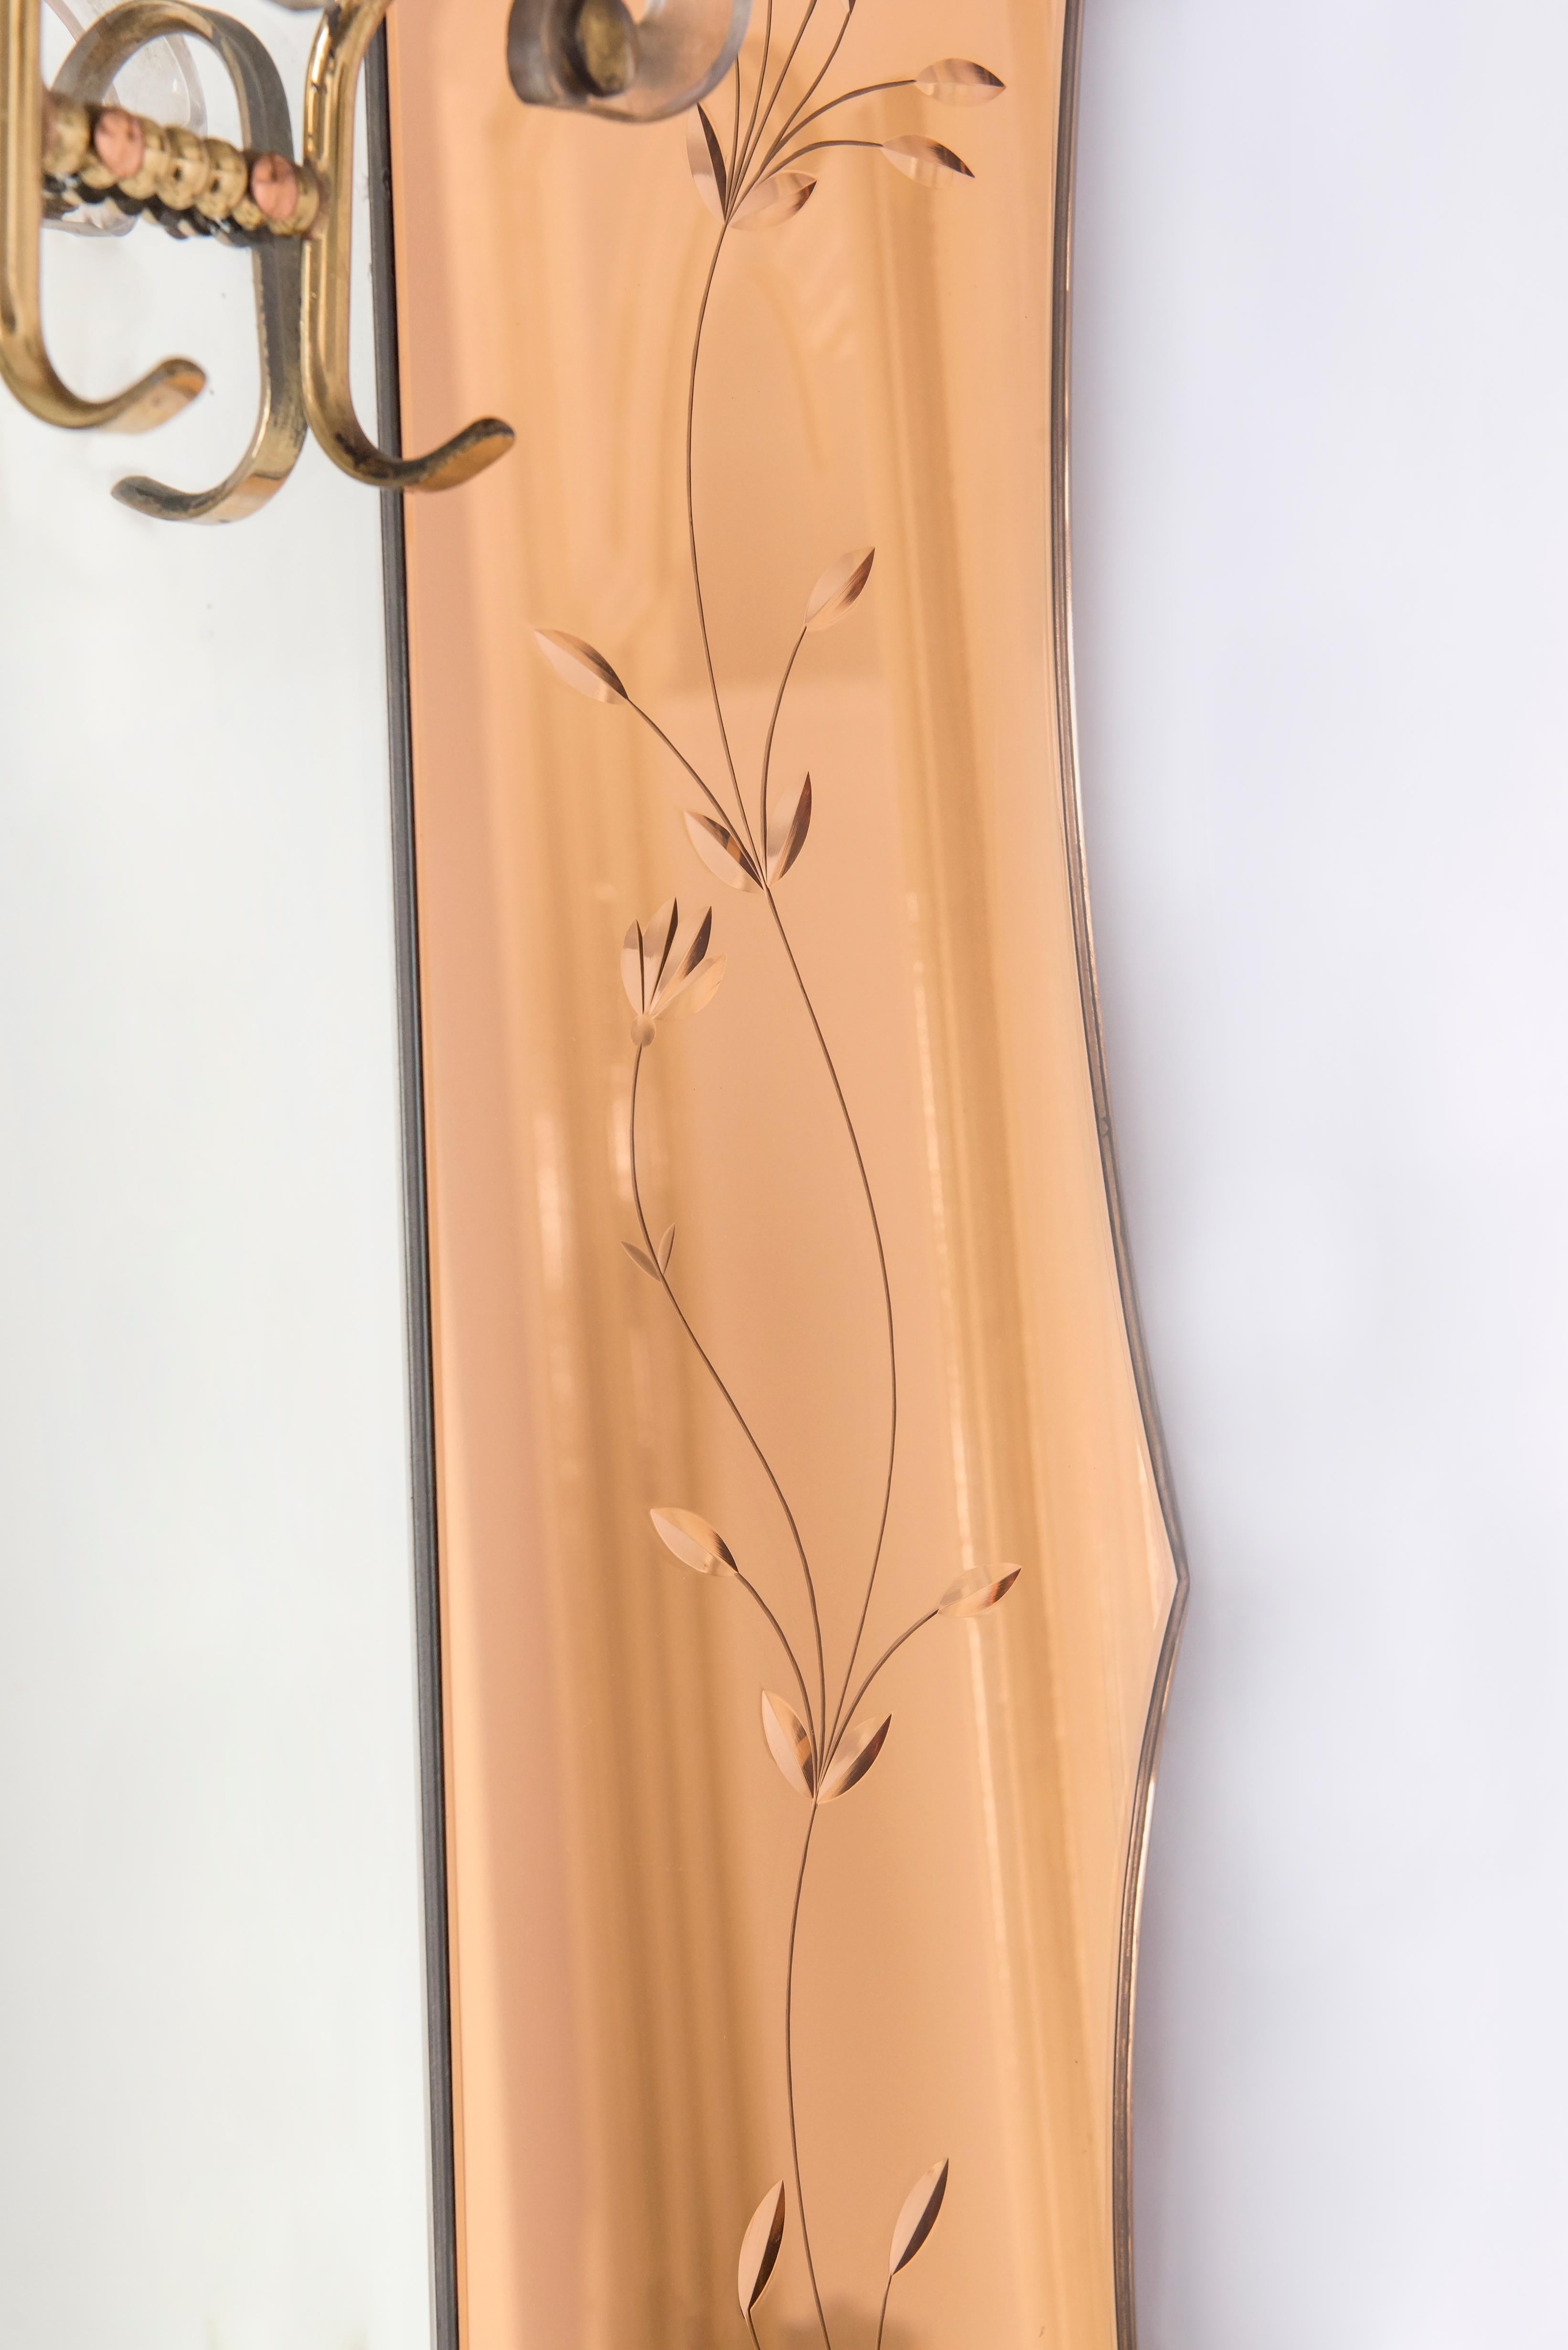 Italian origin Venetian Art Deco wall mirror and coat hanger. Huge full length mirror in the middle surrounded by rose colored edged mirrors. Four coat hangs in brass and glass in the middle and one transparent glass shelf overneath to hold hats.